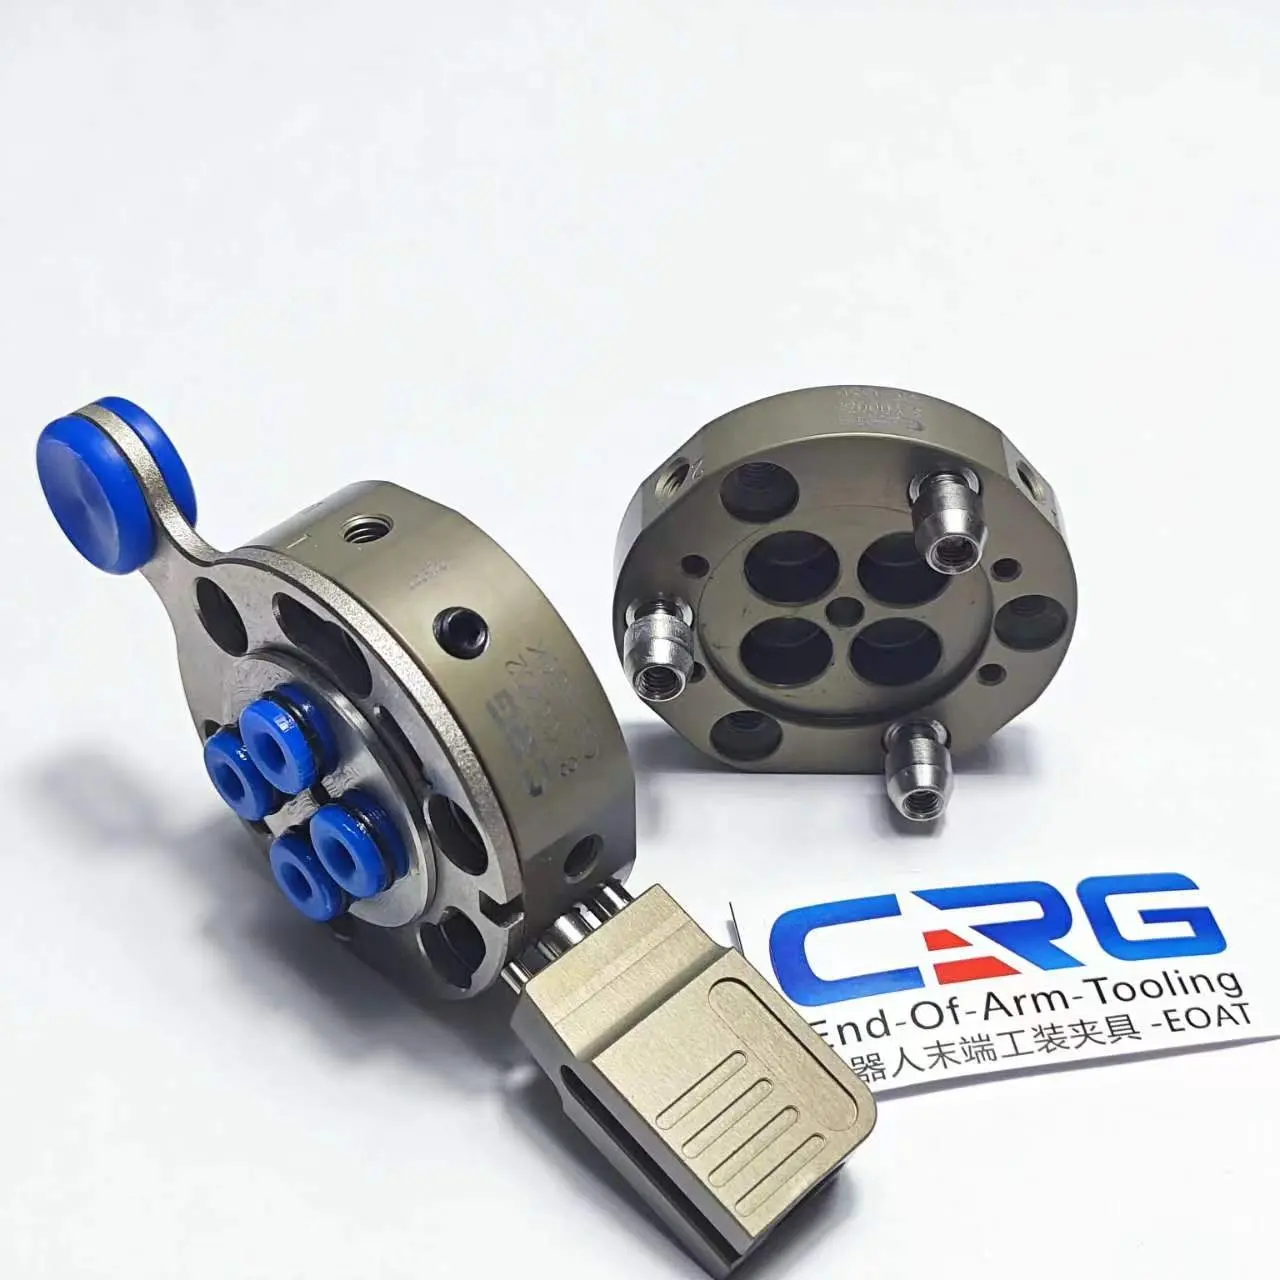 Aluminium Profile CRG end of arm tooling for robotic Quick Changer EOAT of gripper side PEP1818